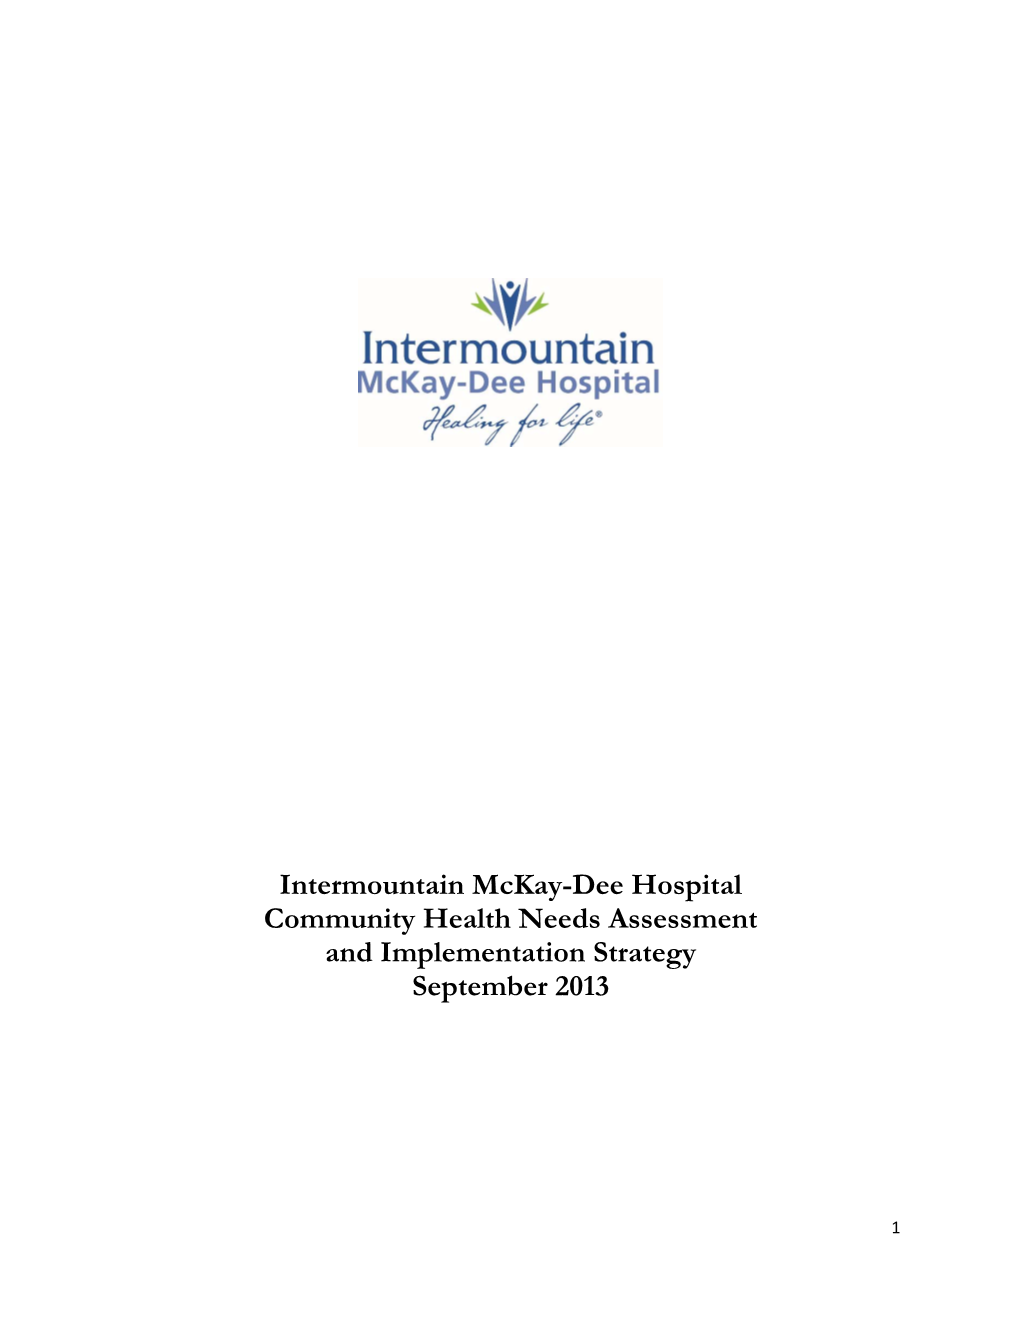 Intermountain Mckay-Dee Hospital Community Health Needs Assessment and Implementation Strategy September 2013